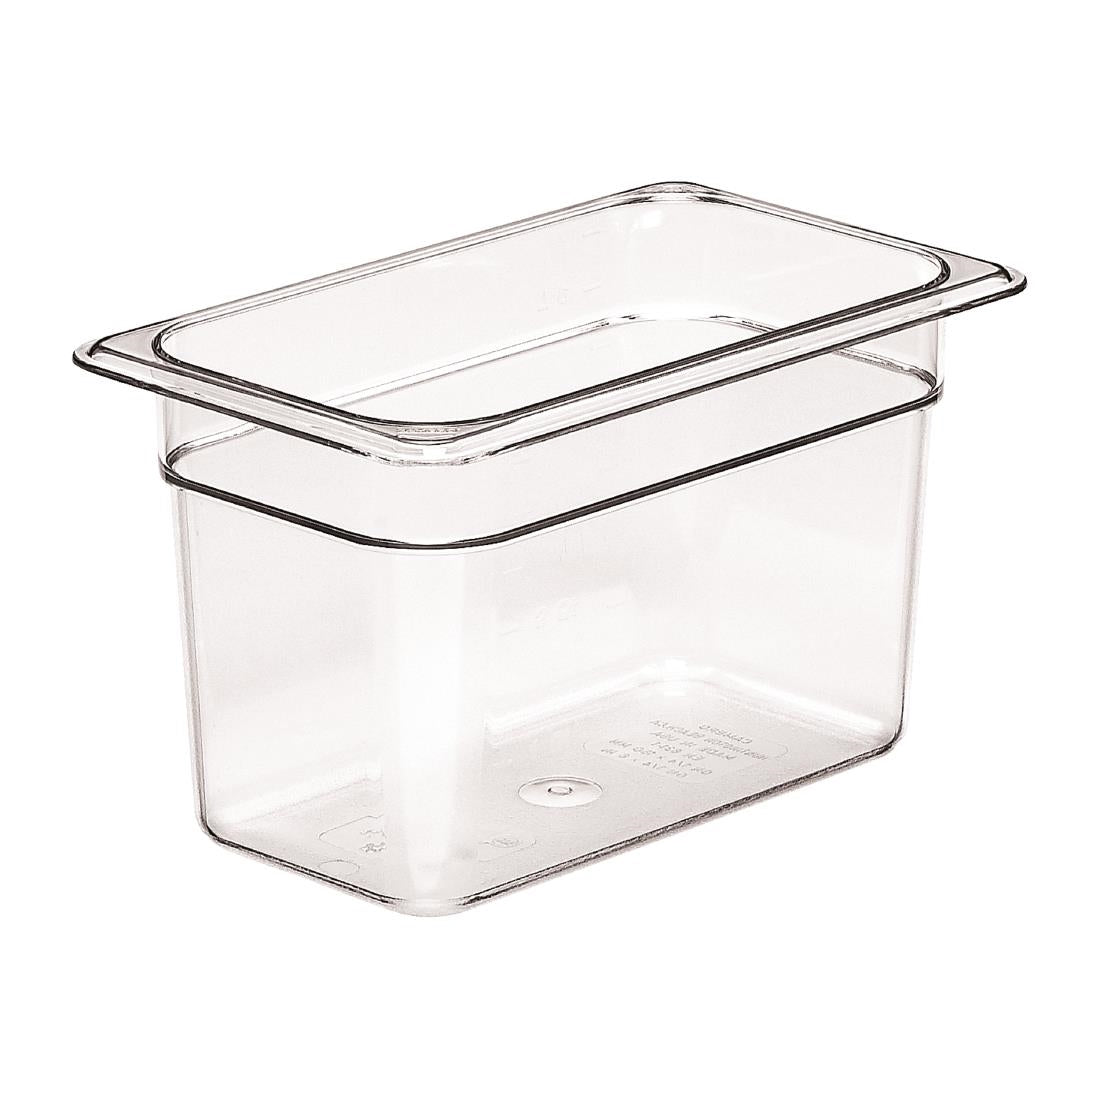 DM747 Cambro Polycarbonate 1/4 Gastronorm Pan 150mm JD Catering Equipment Solutions Ltd